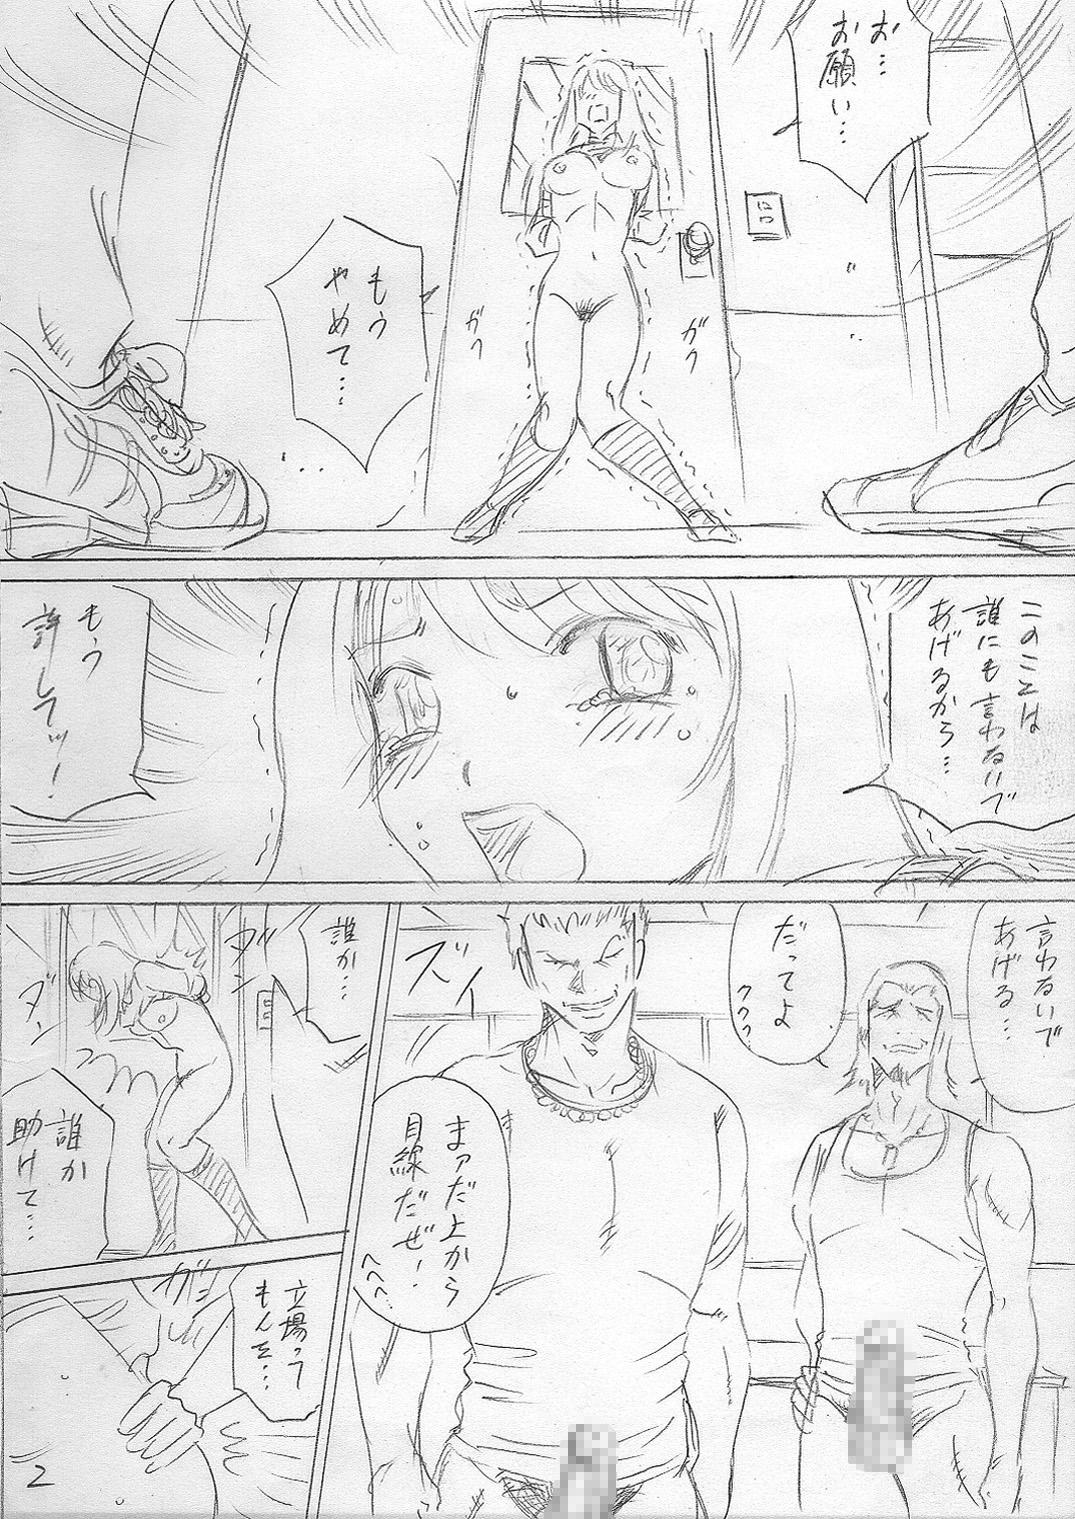 Pervs 落ちていく日（後編） Guy - Page 2